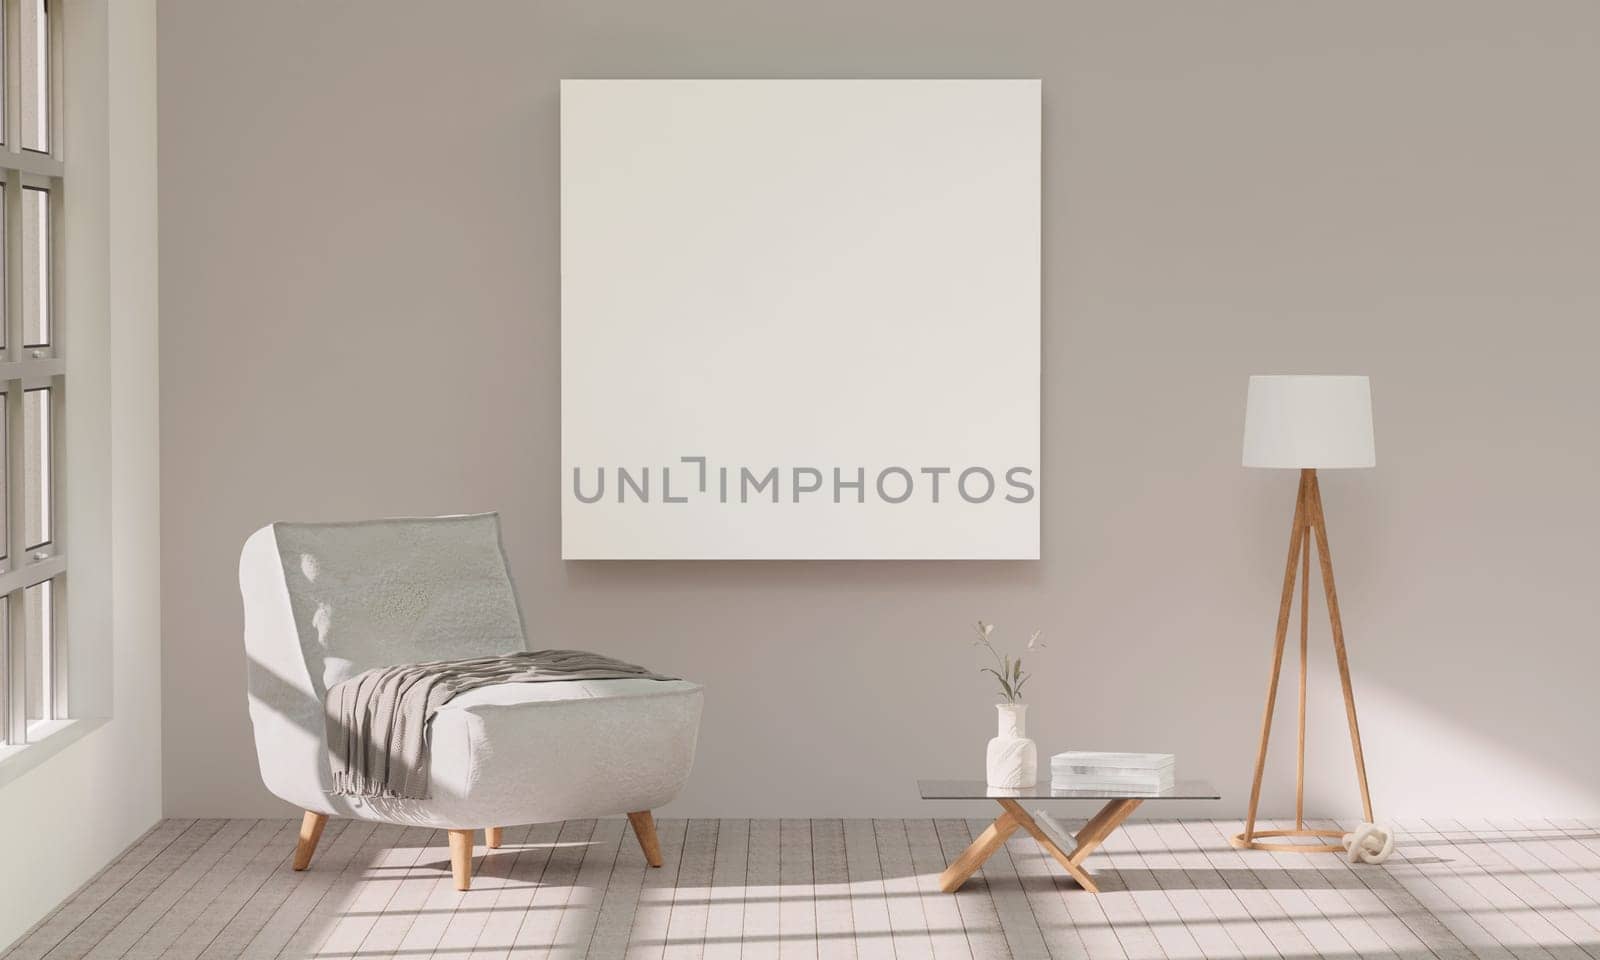 Blank horizontal poster frame mock up in living room interior, modern living room interior background, beige sofa. 3d rendering illustration by meepiangraphic